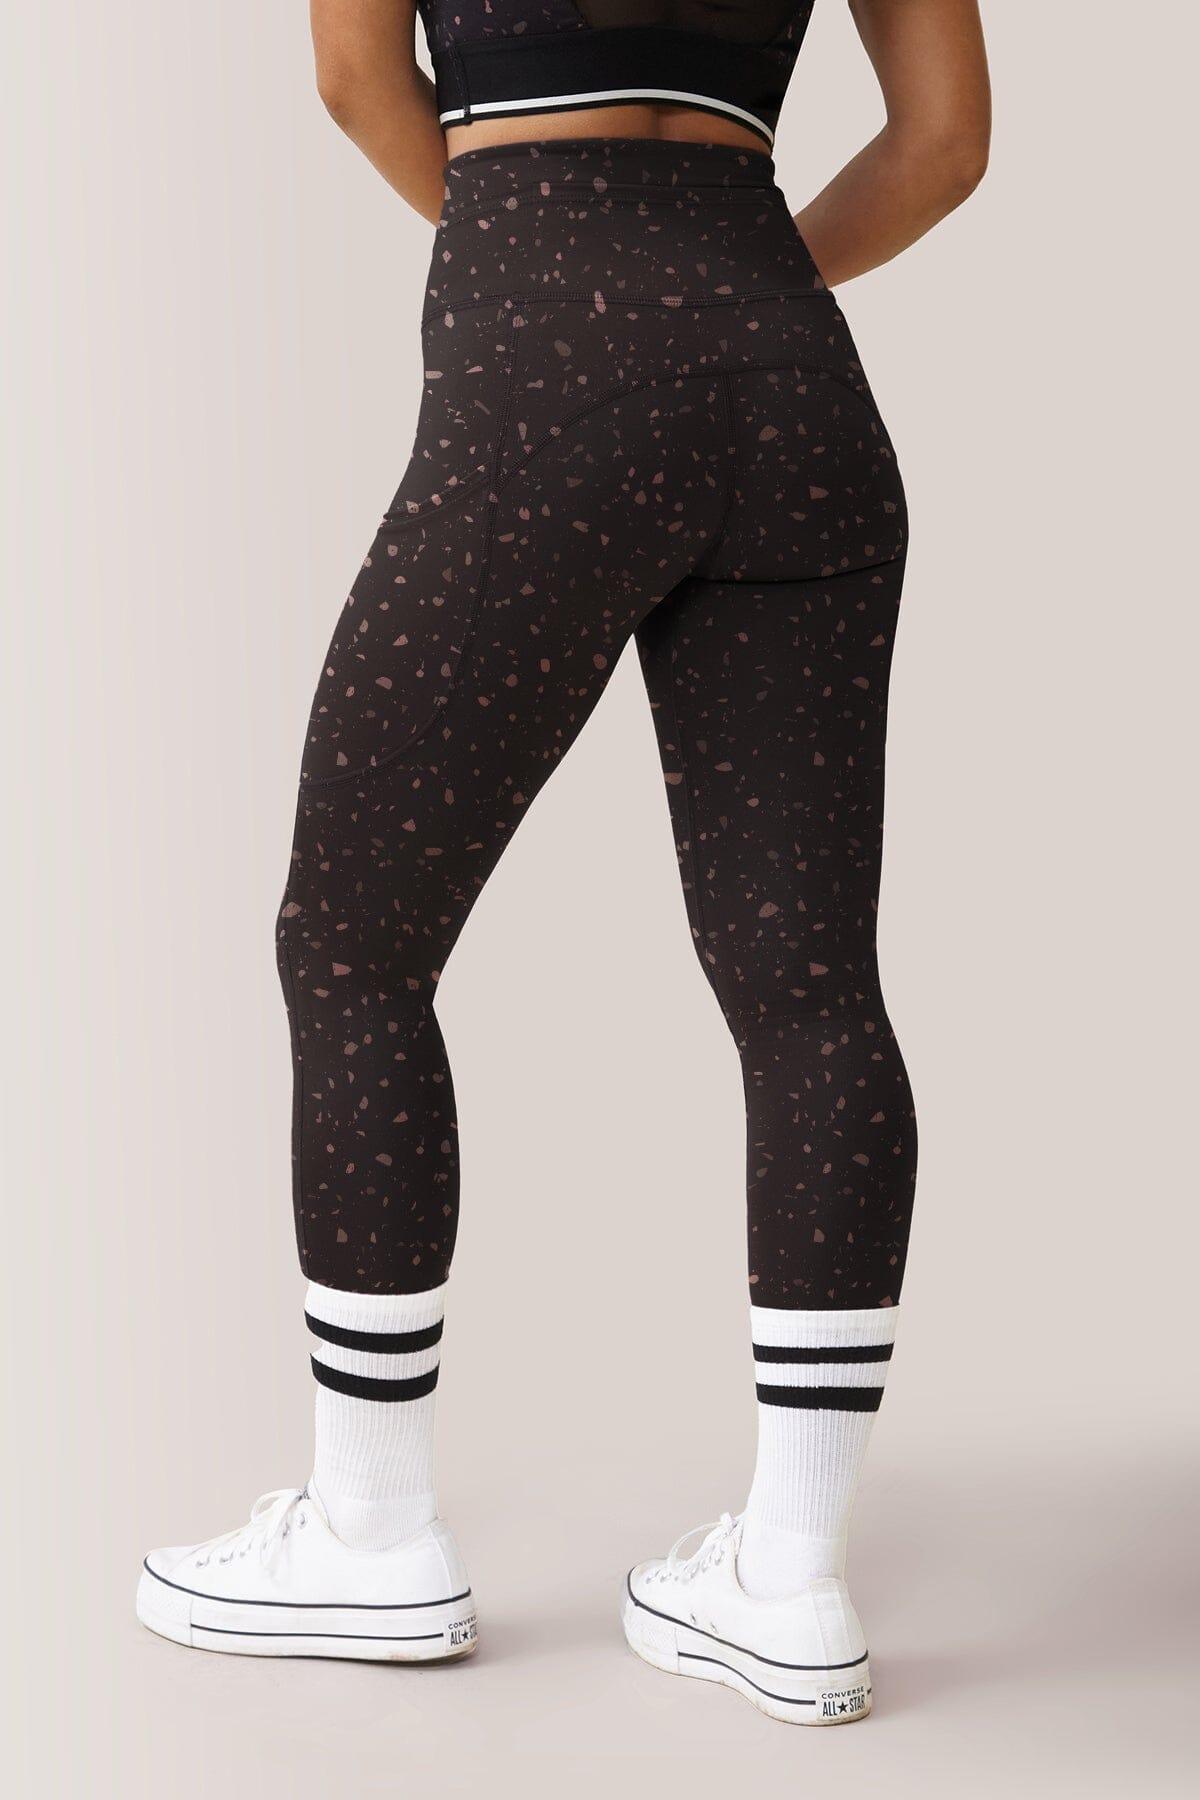 Femme portant les leggings avec pochettes Everyday de Rose Boreal./ Women wearing the Everyday Legging with pockets by Rose Boreal. -Terrazzo